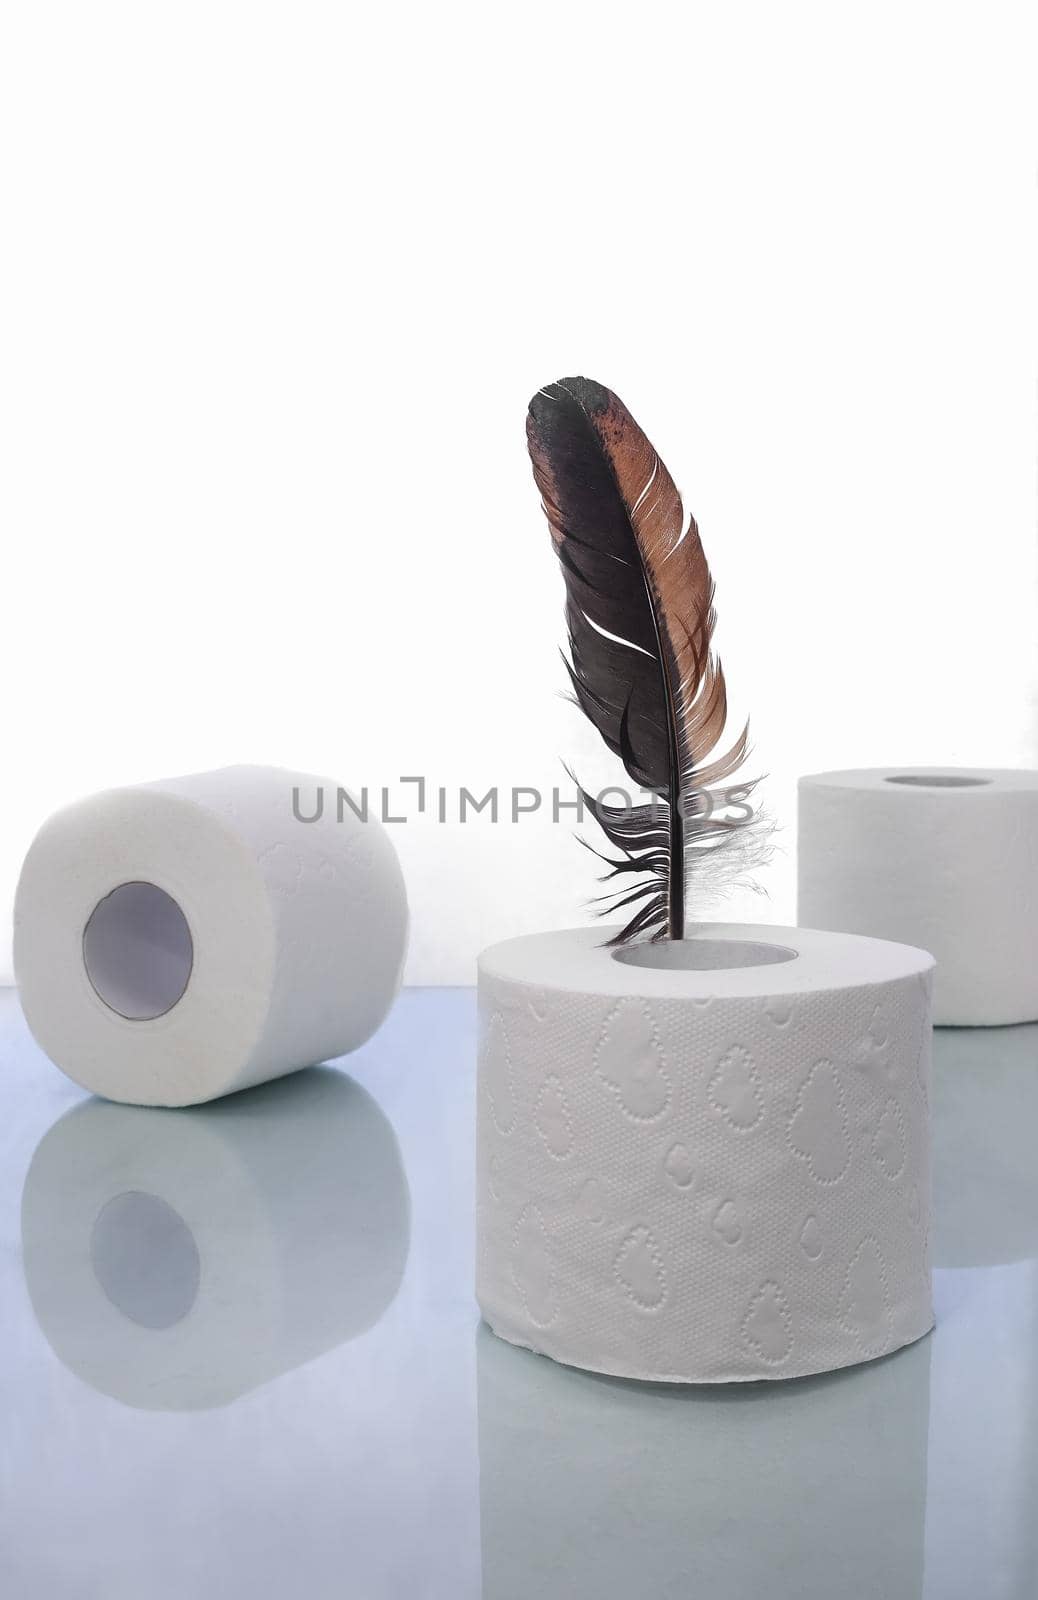 Toilet paper and a bird feather, a symbol of soft touch. by georgina198